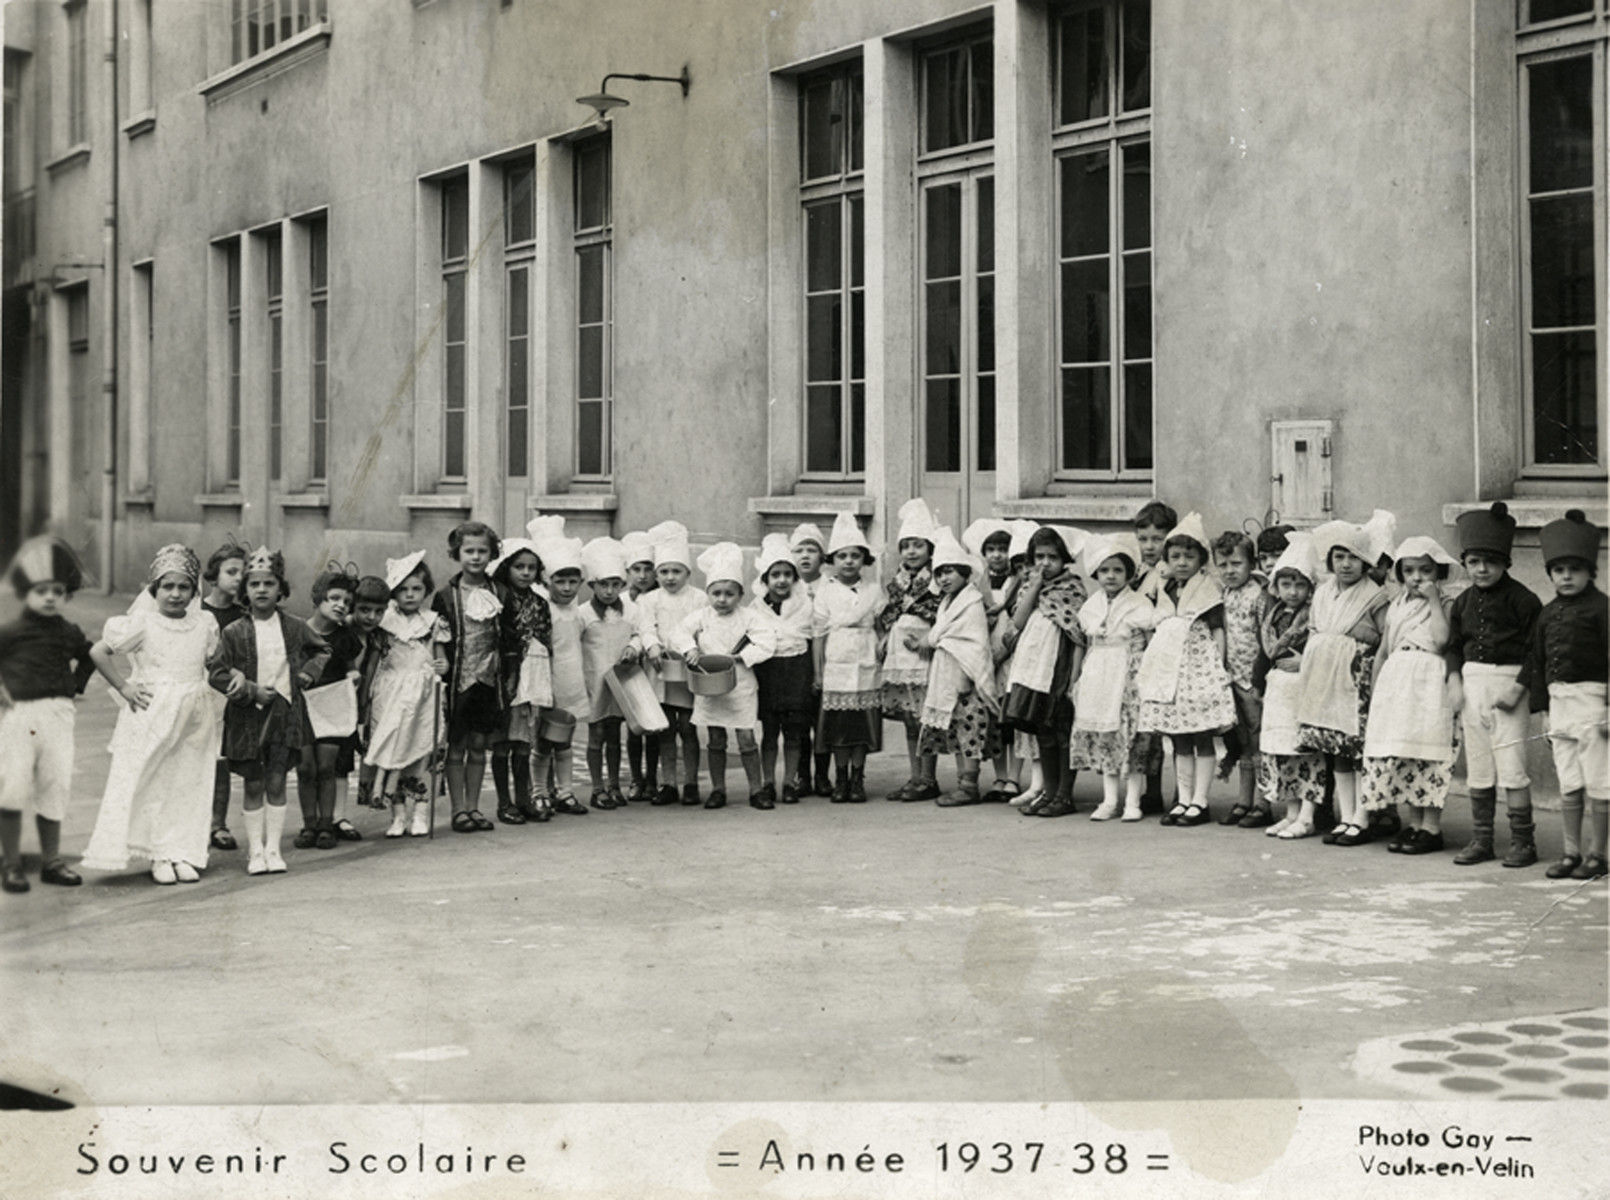 Children in an elementary school in Lyon pose in costume to celebrated Mardi Gras.